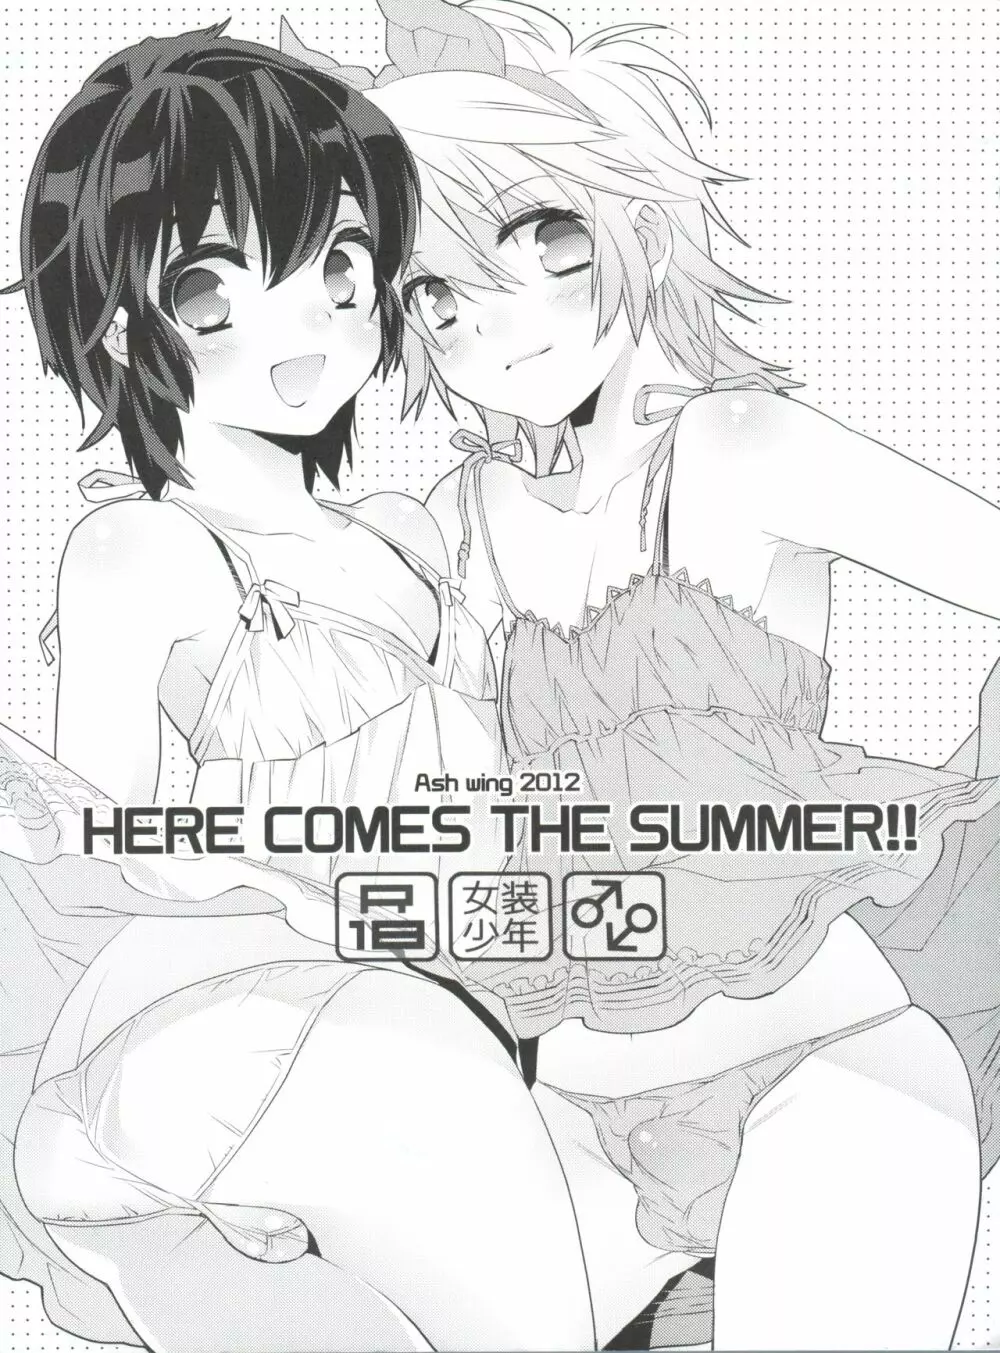 HERE COMES THE SUMMER!! - page1